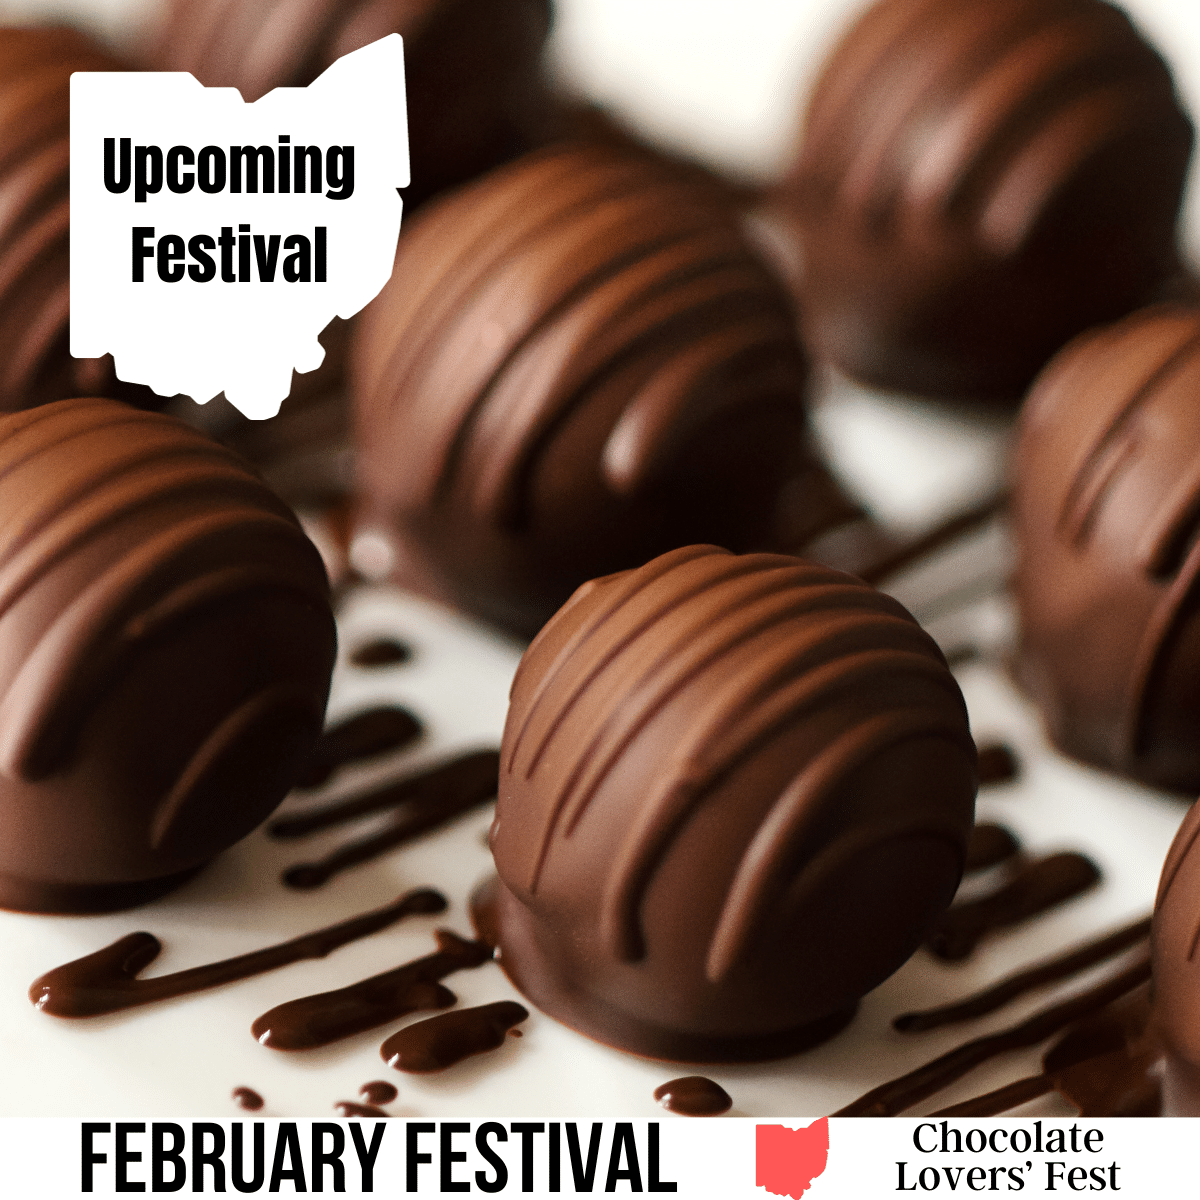 A square image with a photo of truffles candies drizzled in chocolate on a white background. A white shape of Ohio has text Upcoming Festival. A white strip across the bottom has text February Festival Chocolate Lovers' Fest.